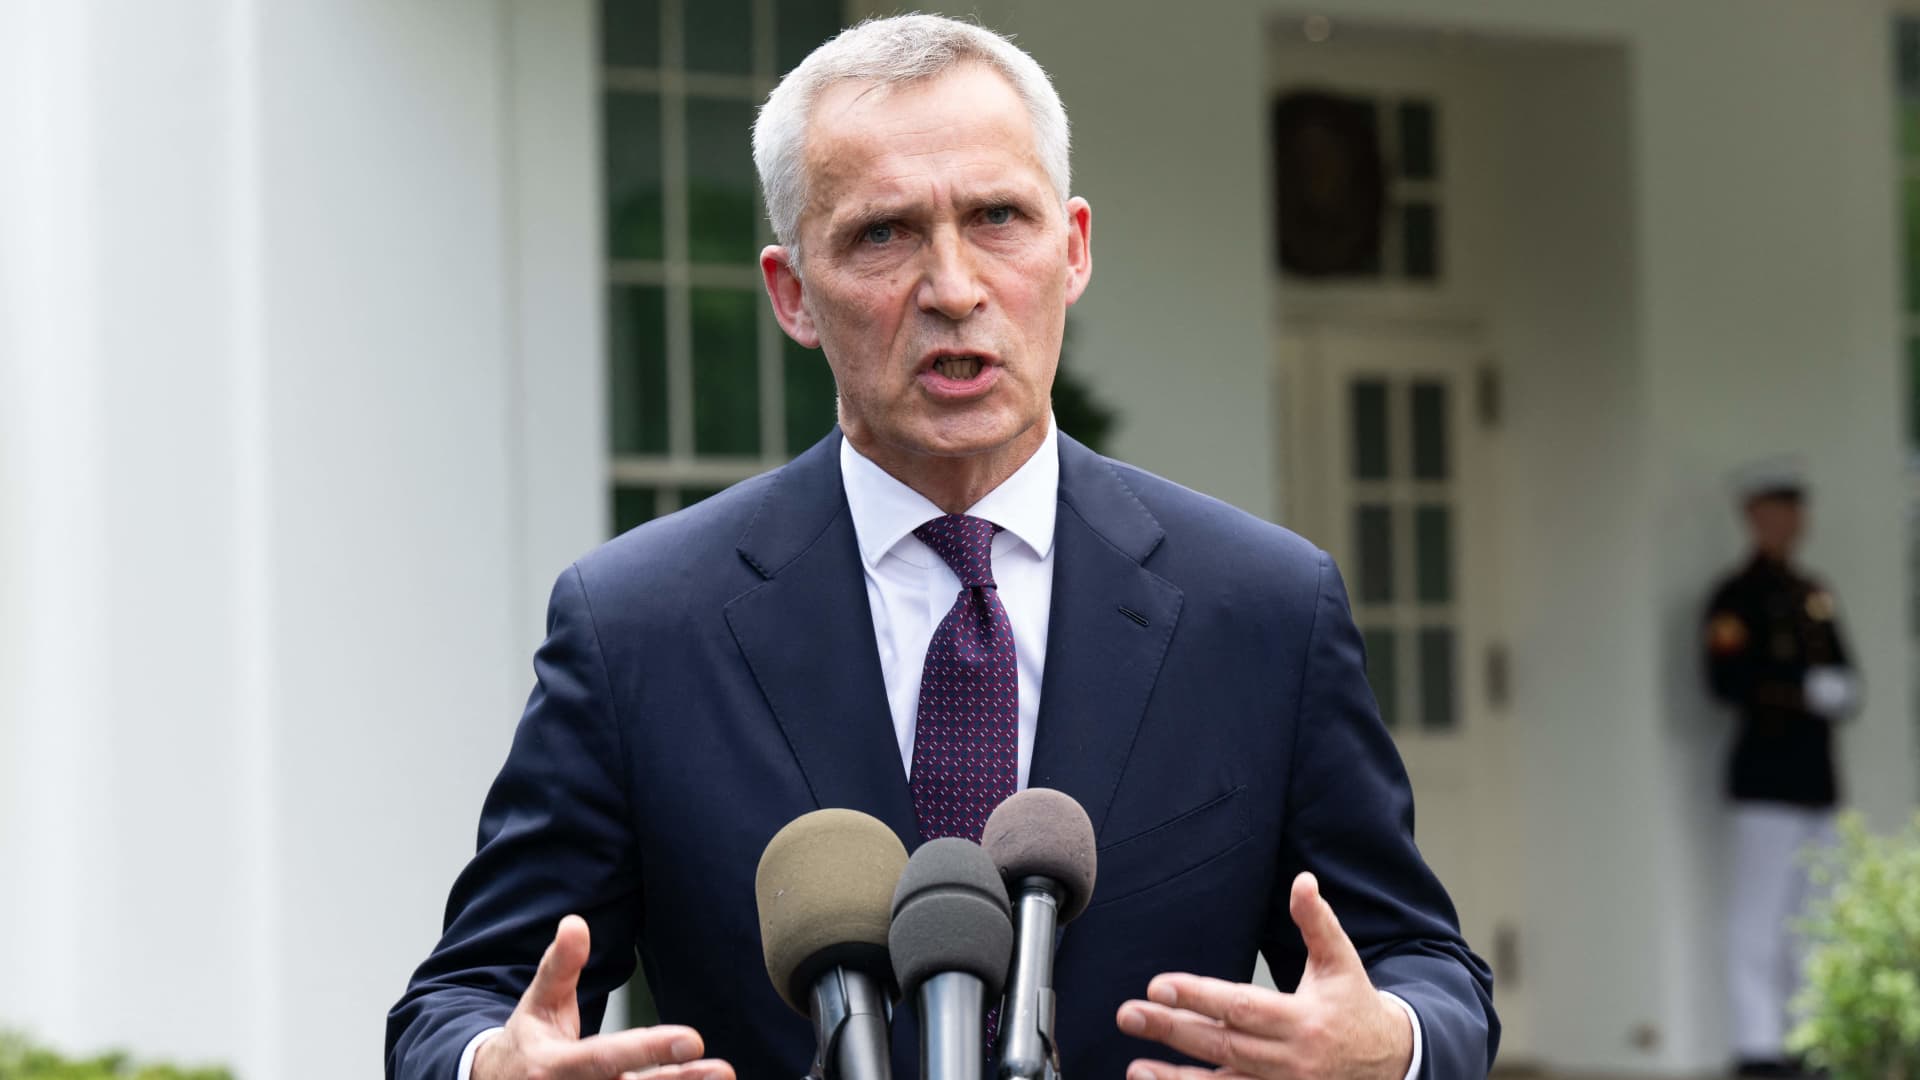 NATO Secretary General Jens Stoltenberg speaks to the media outside of the West Wing following a meeting with US President Joe Biden at the White House in Washington, DC, June 2, 2022.